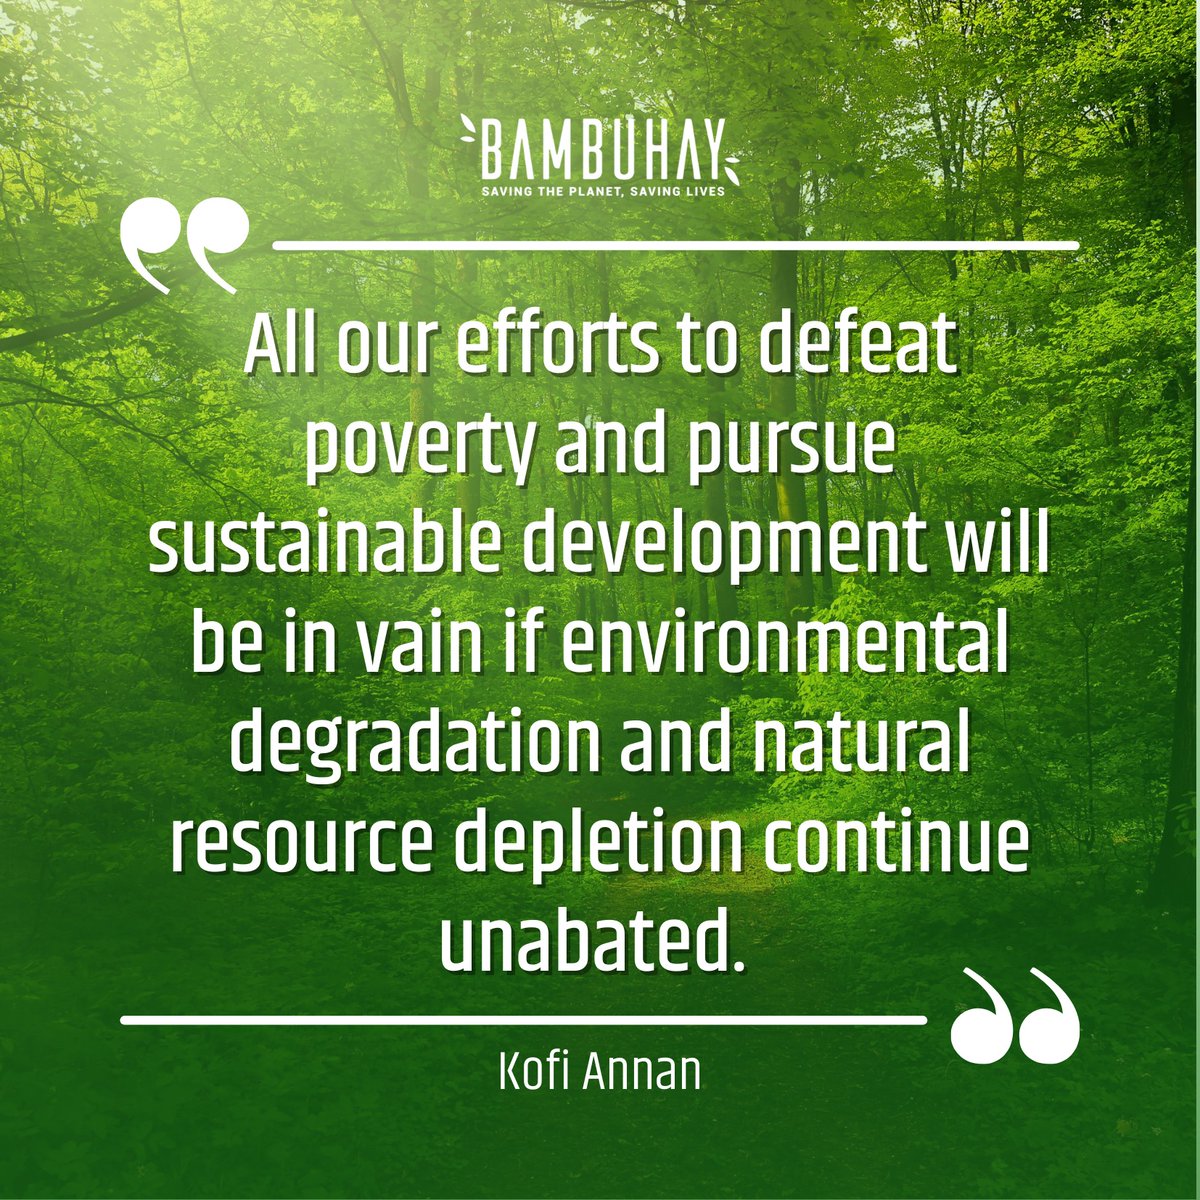 All our efforts to defeat poverty and pursue sustainable development will be in vain if environmental degradation and natural resource depletion continue unabated.
Kofi Annan
#PlasticFreeStartsWithMe #breakfreefromplastic
#savingtheplanet #savinglives #plantable